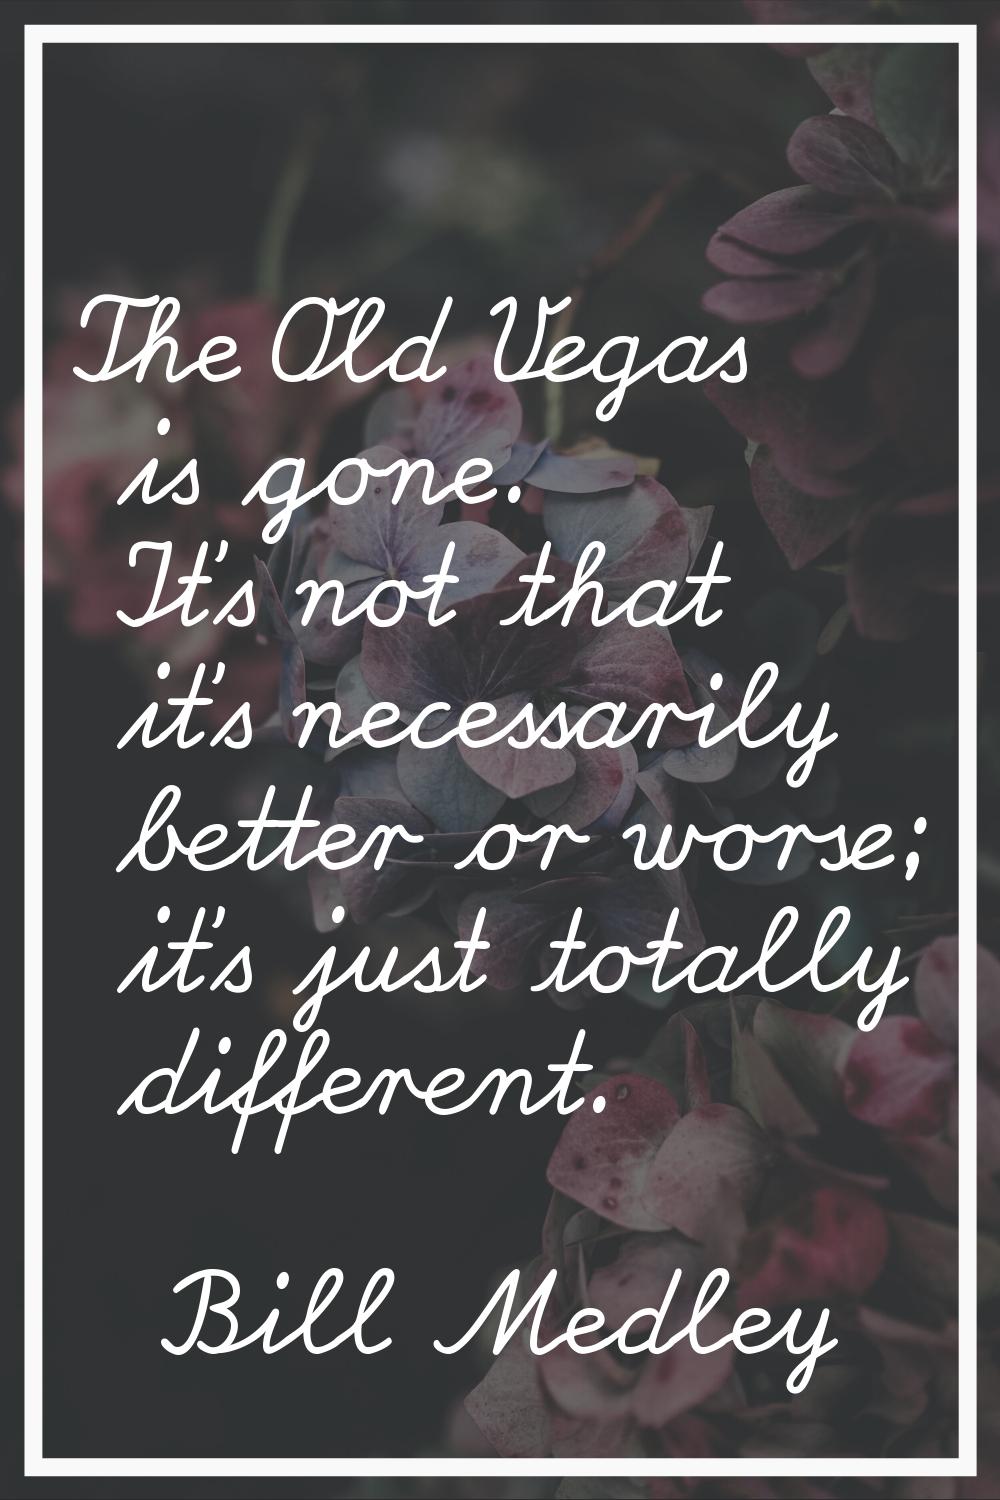 The Old Vegas is gone. It's not that it's necessarily better or worse; it's just totally different.